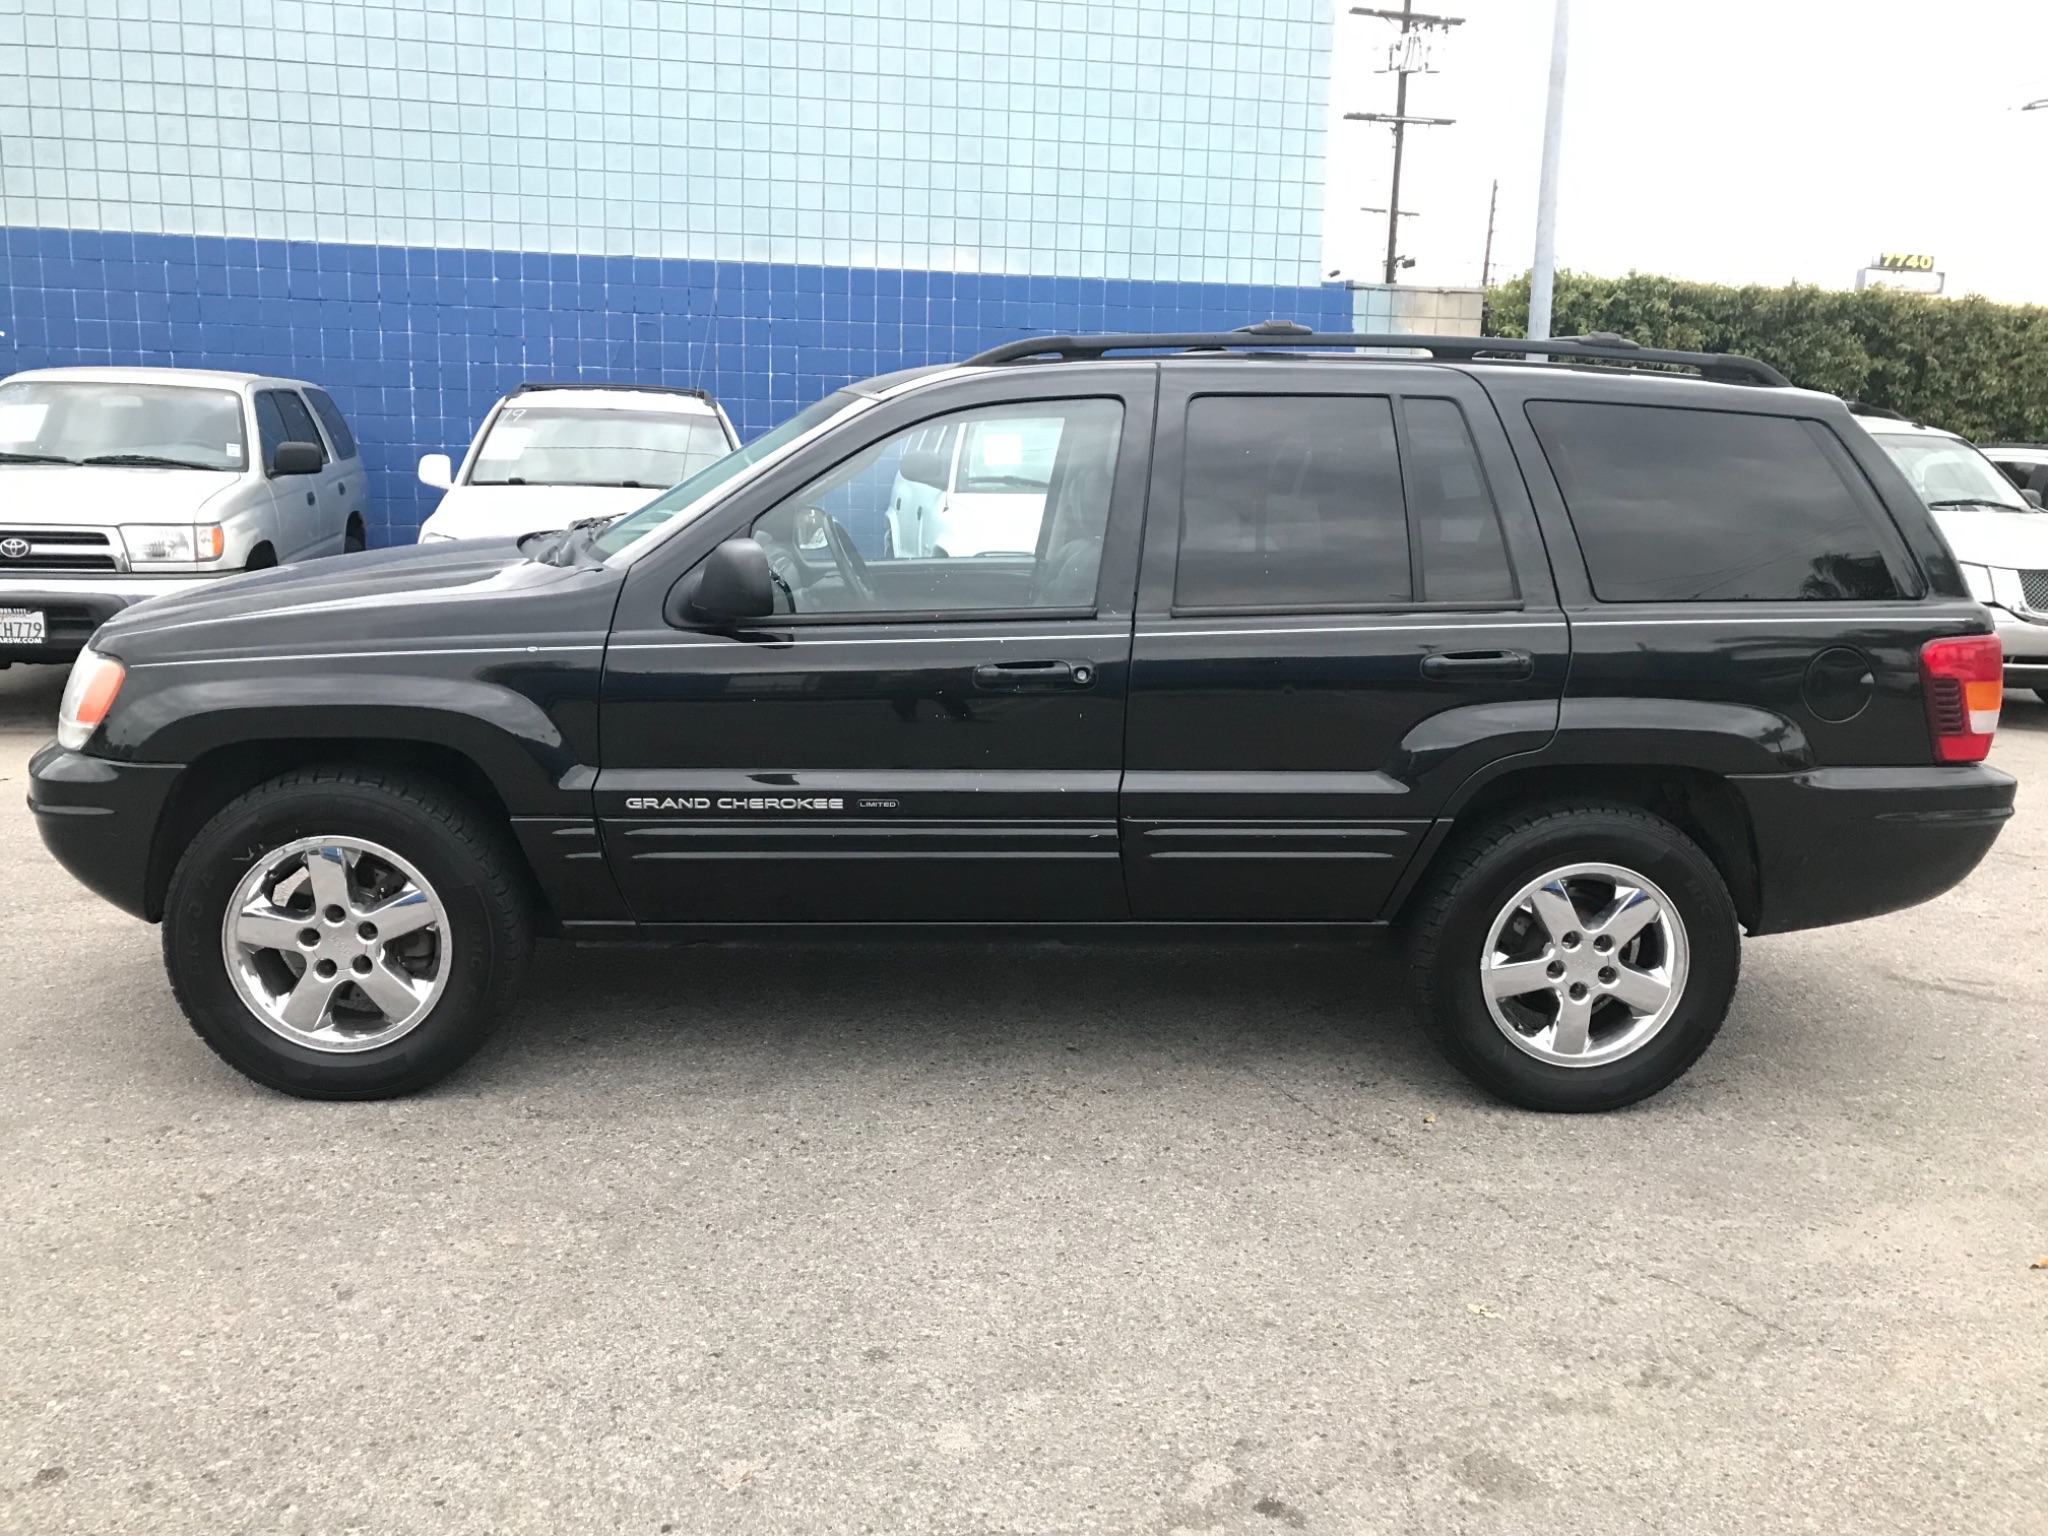 Used 2003 Jeep Grand Cherokee Limited at City Cars